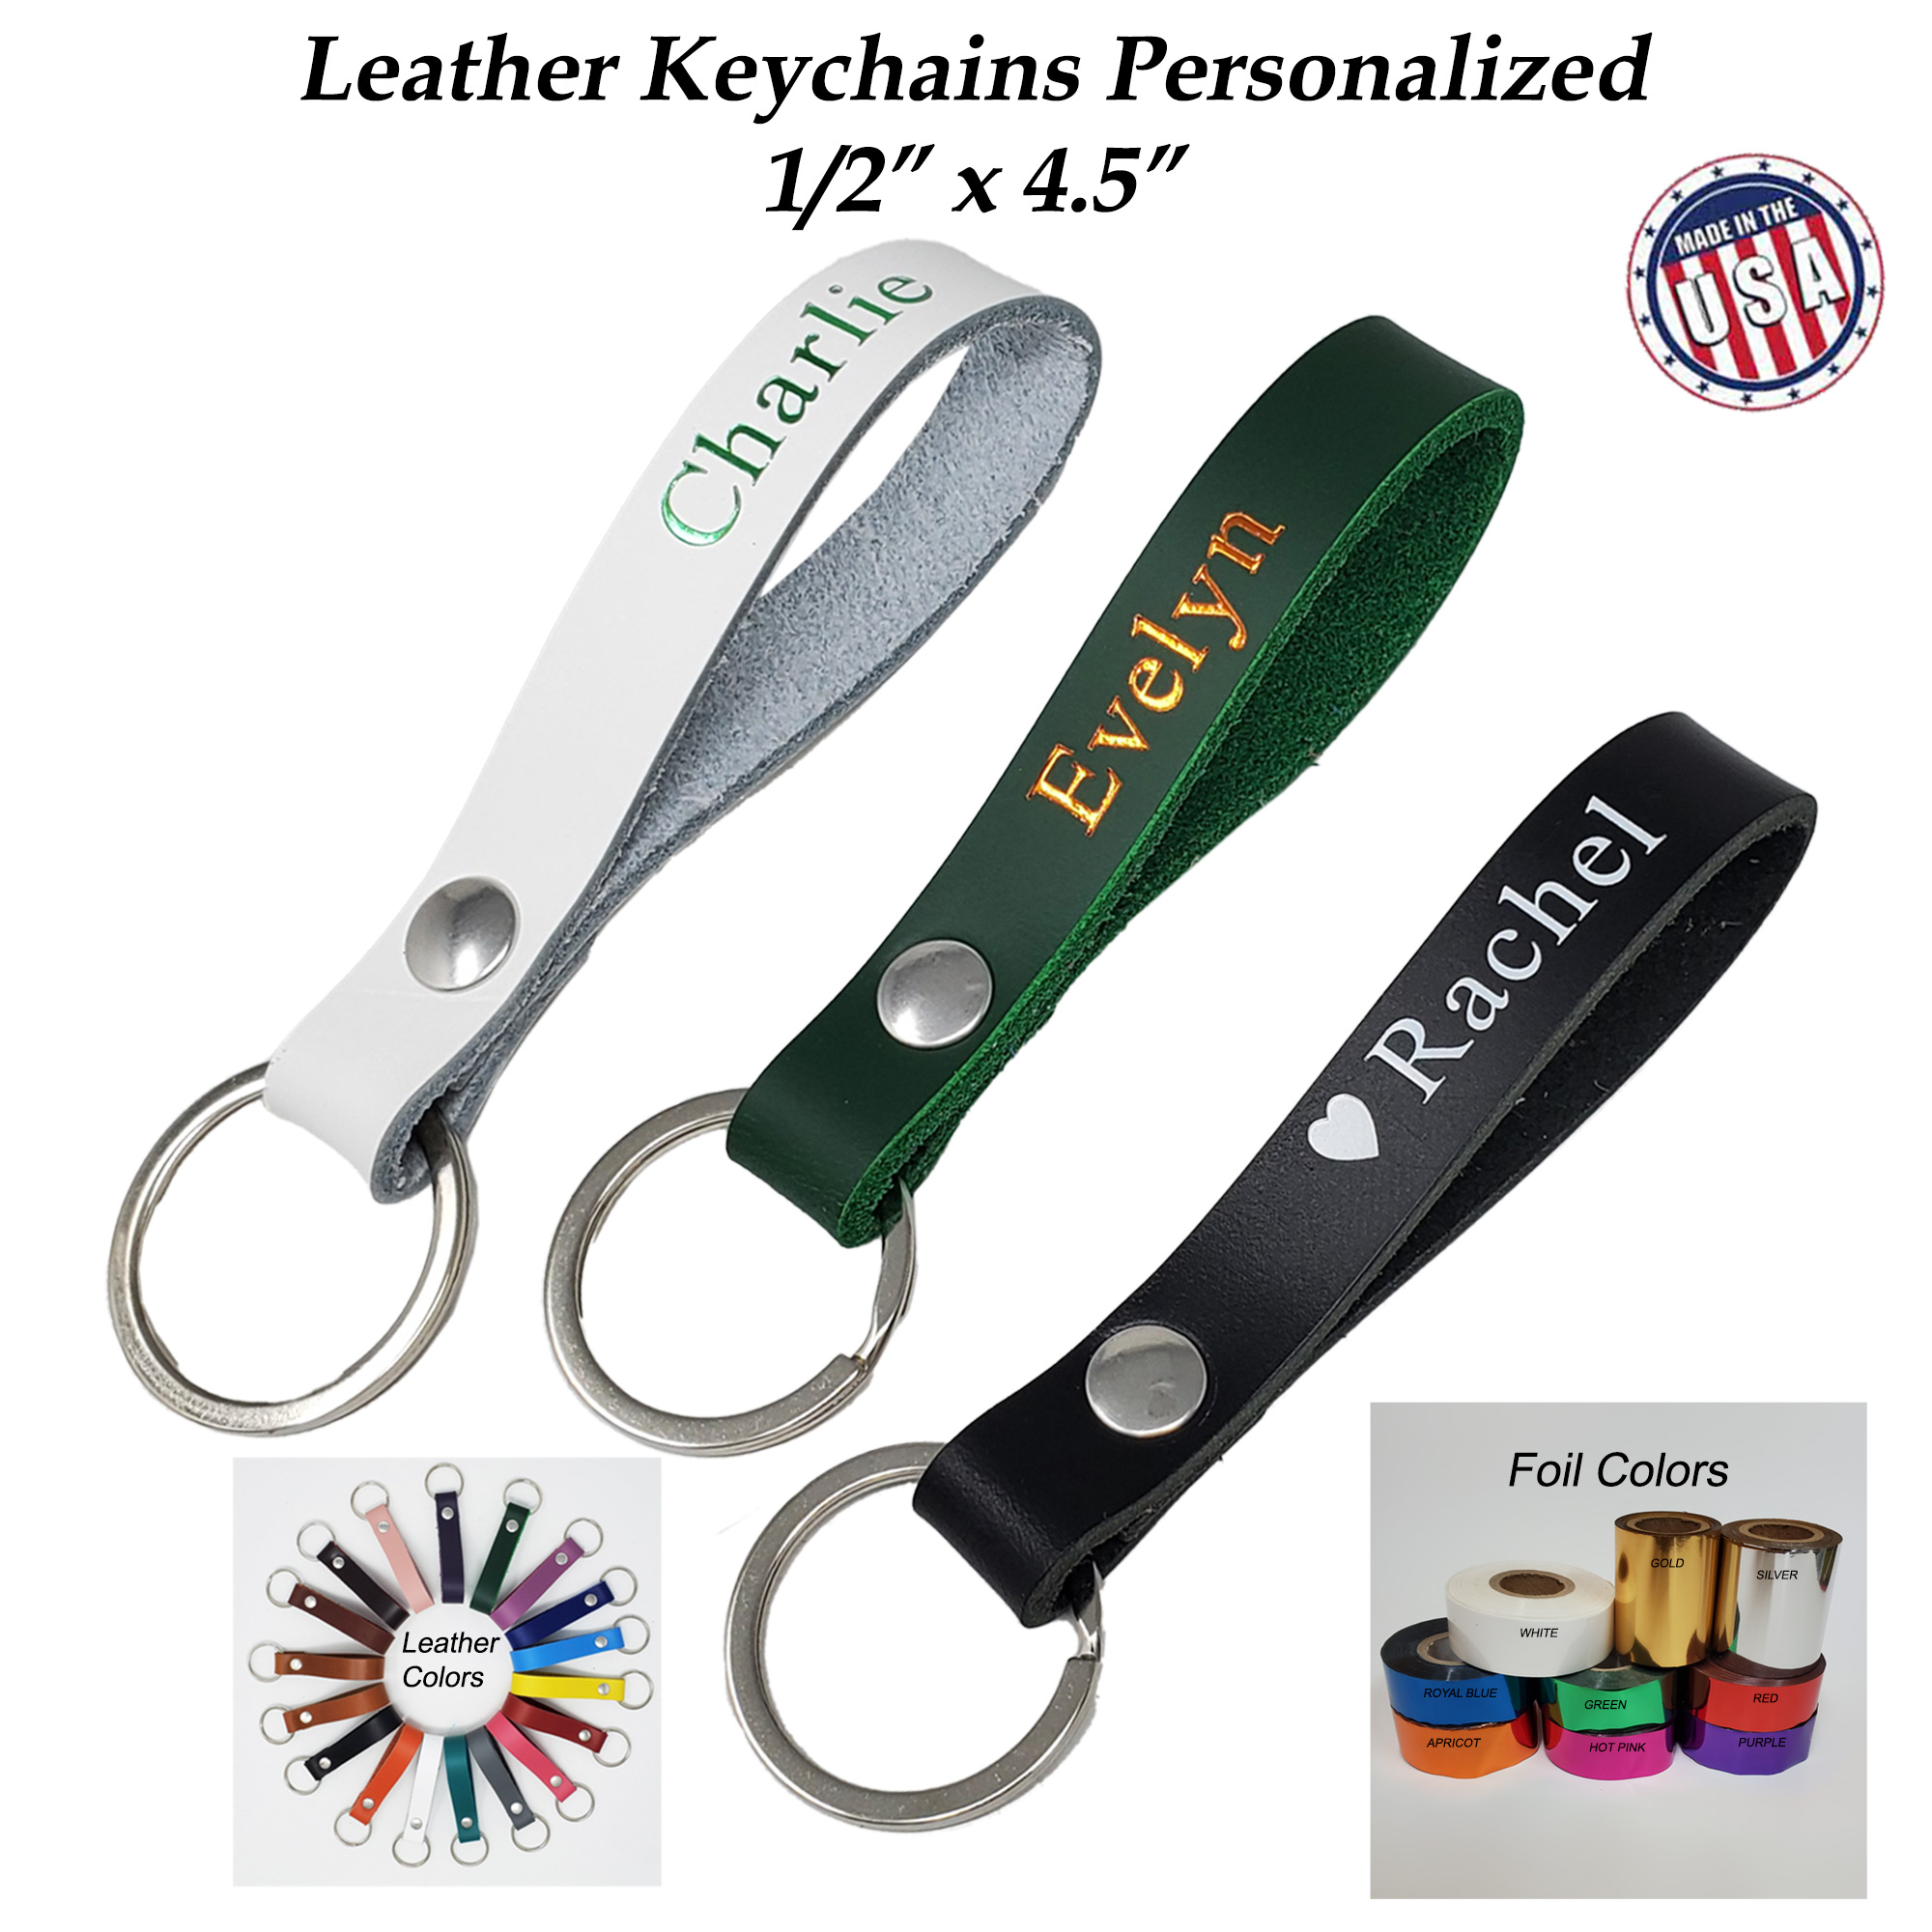 leather keychains personalized with name